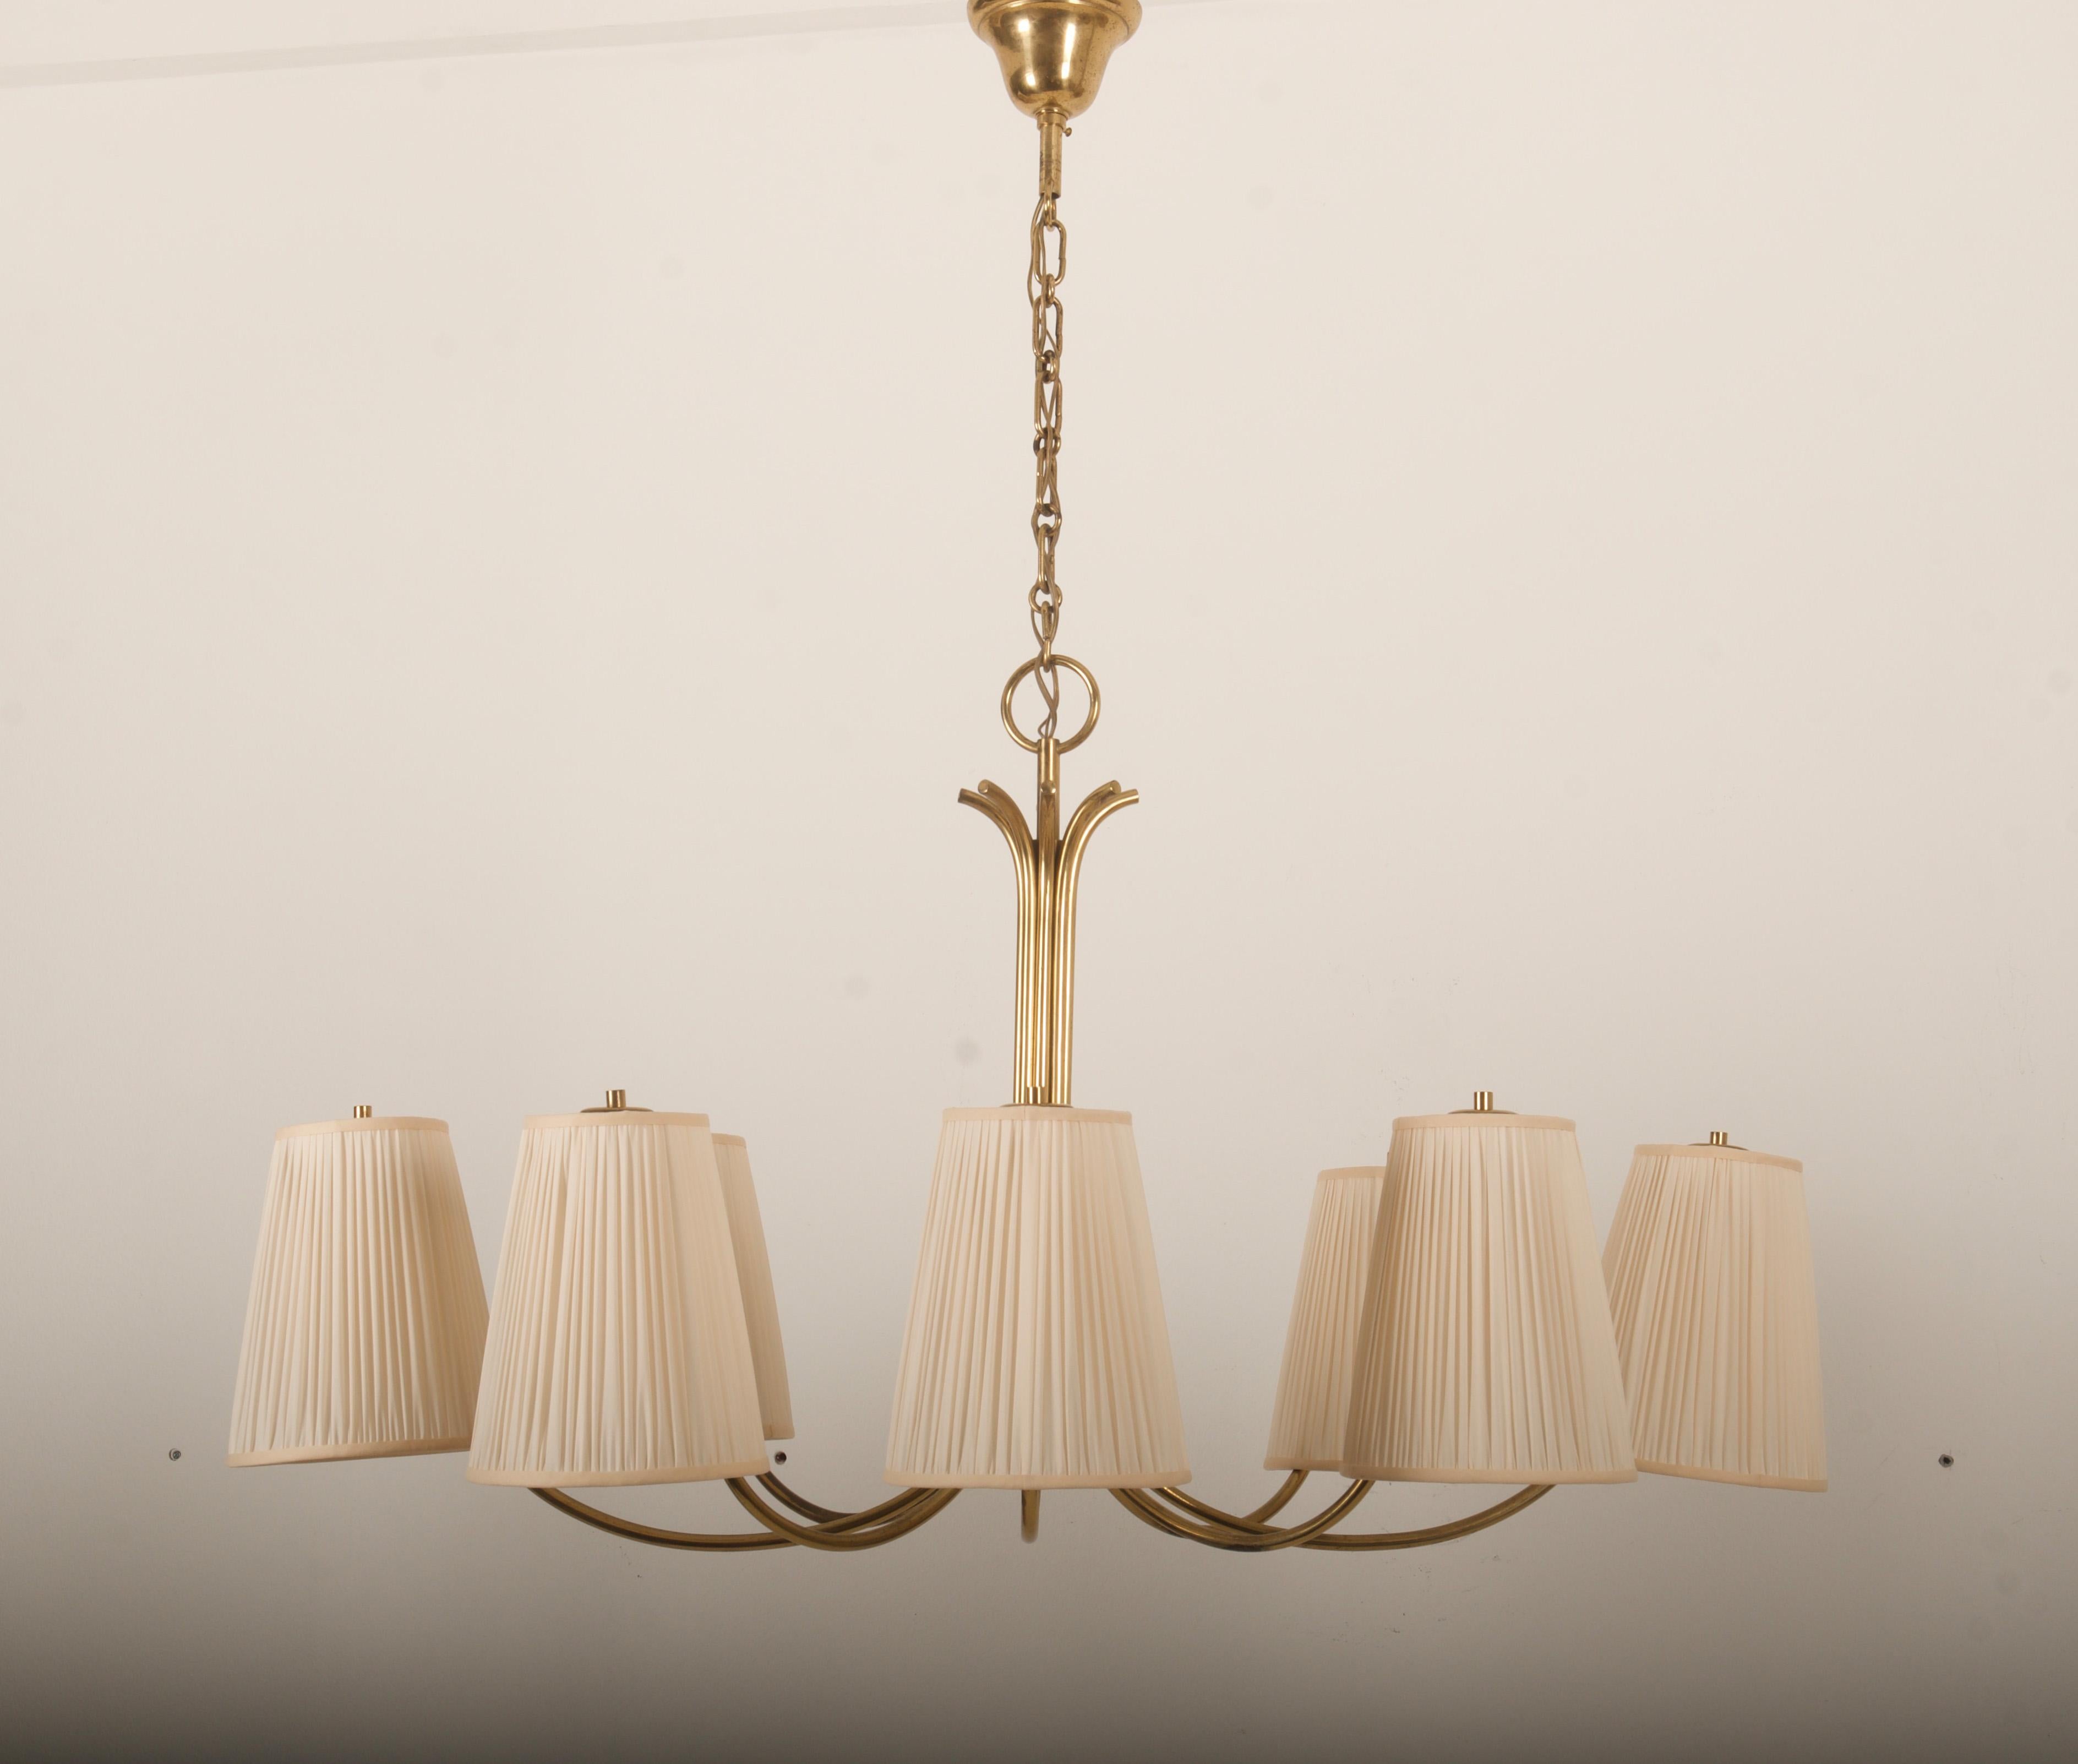 Rare Eight Arms Chandelier by Josef Frank for Kalmar 2